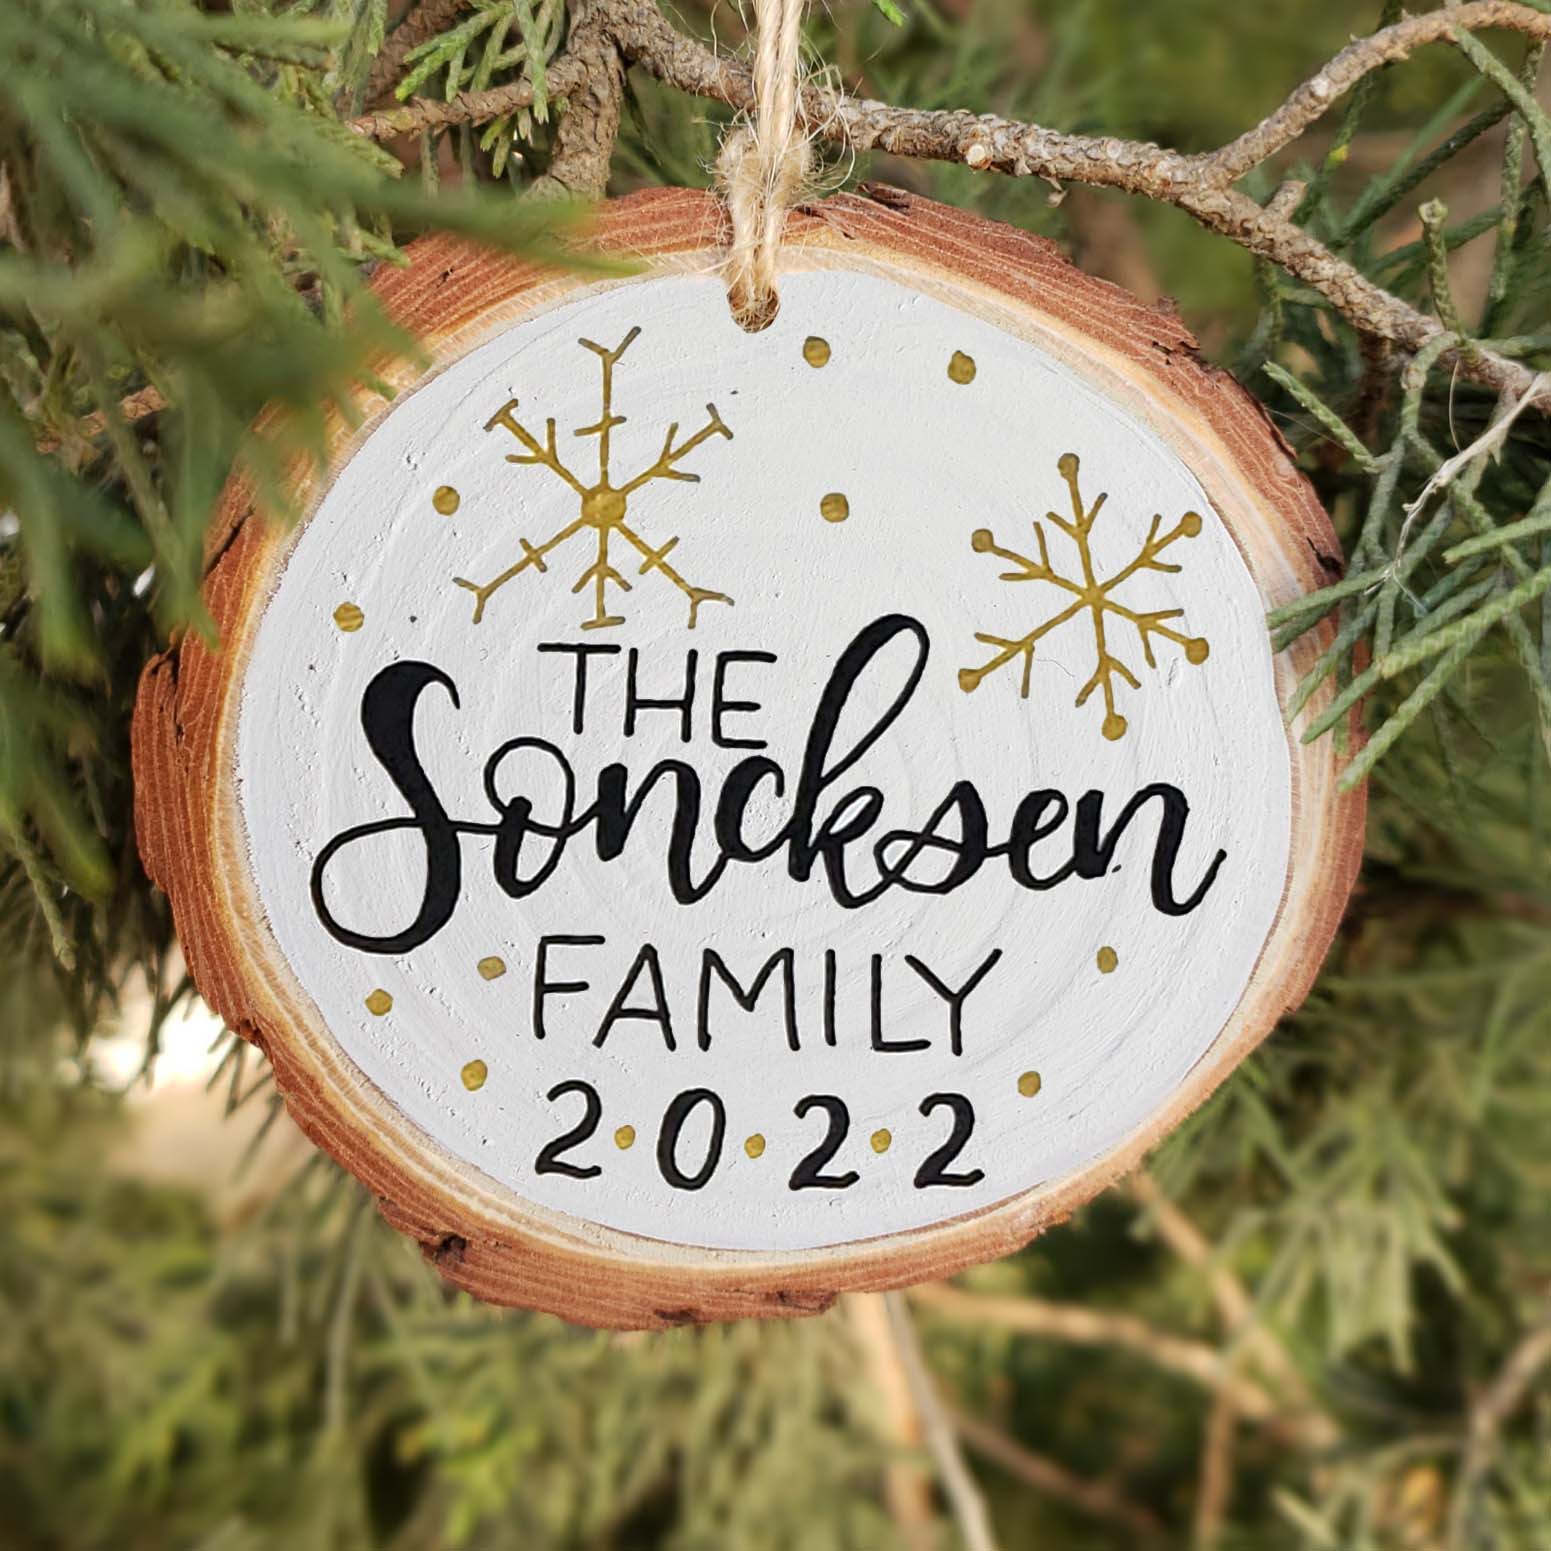 Hand painted rustic wood slice ornament with hand lettered family name and year and snowflake doodles